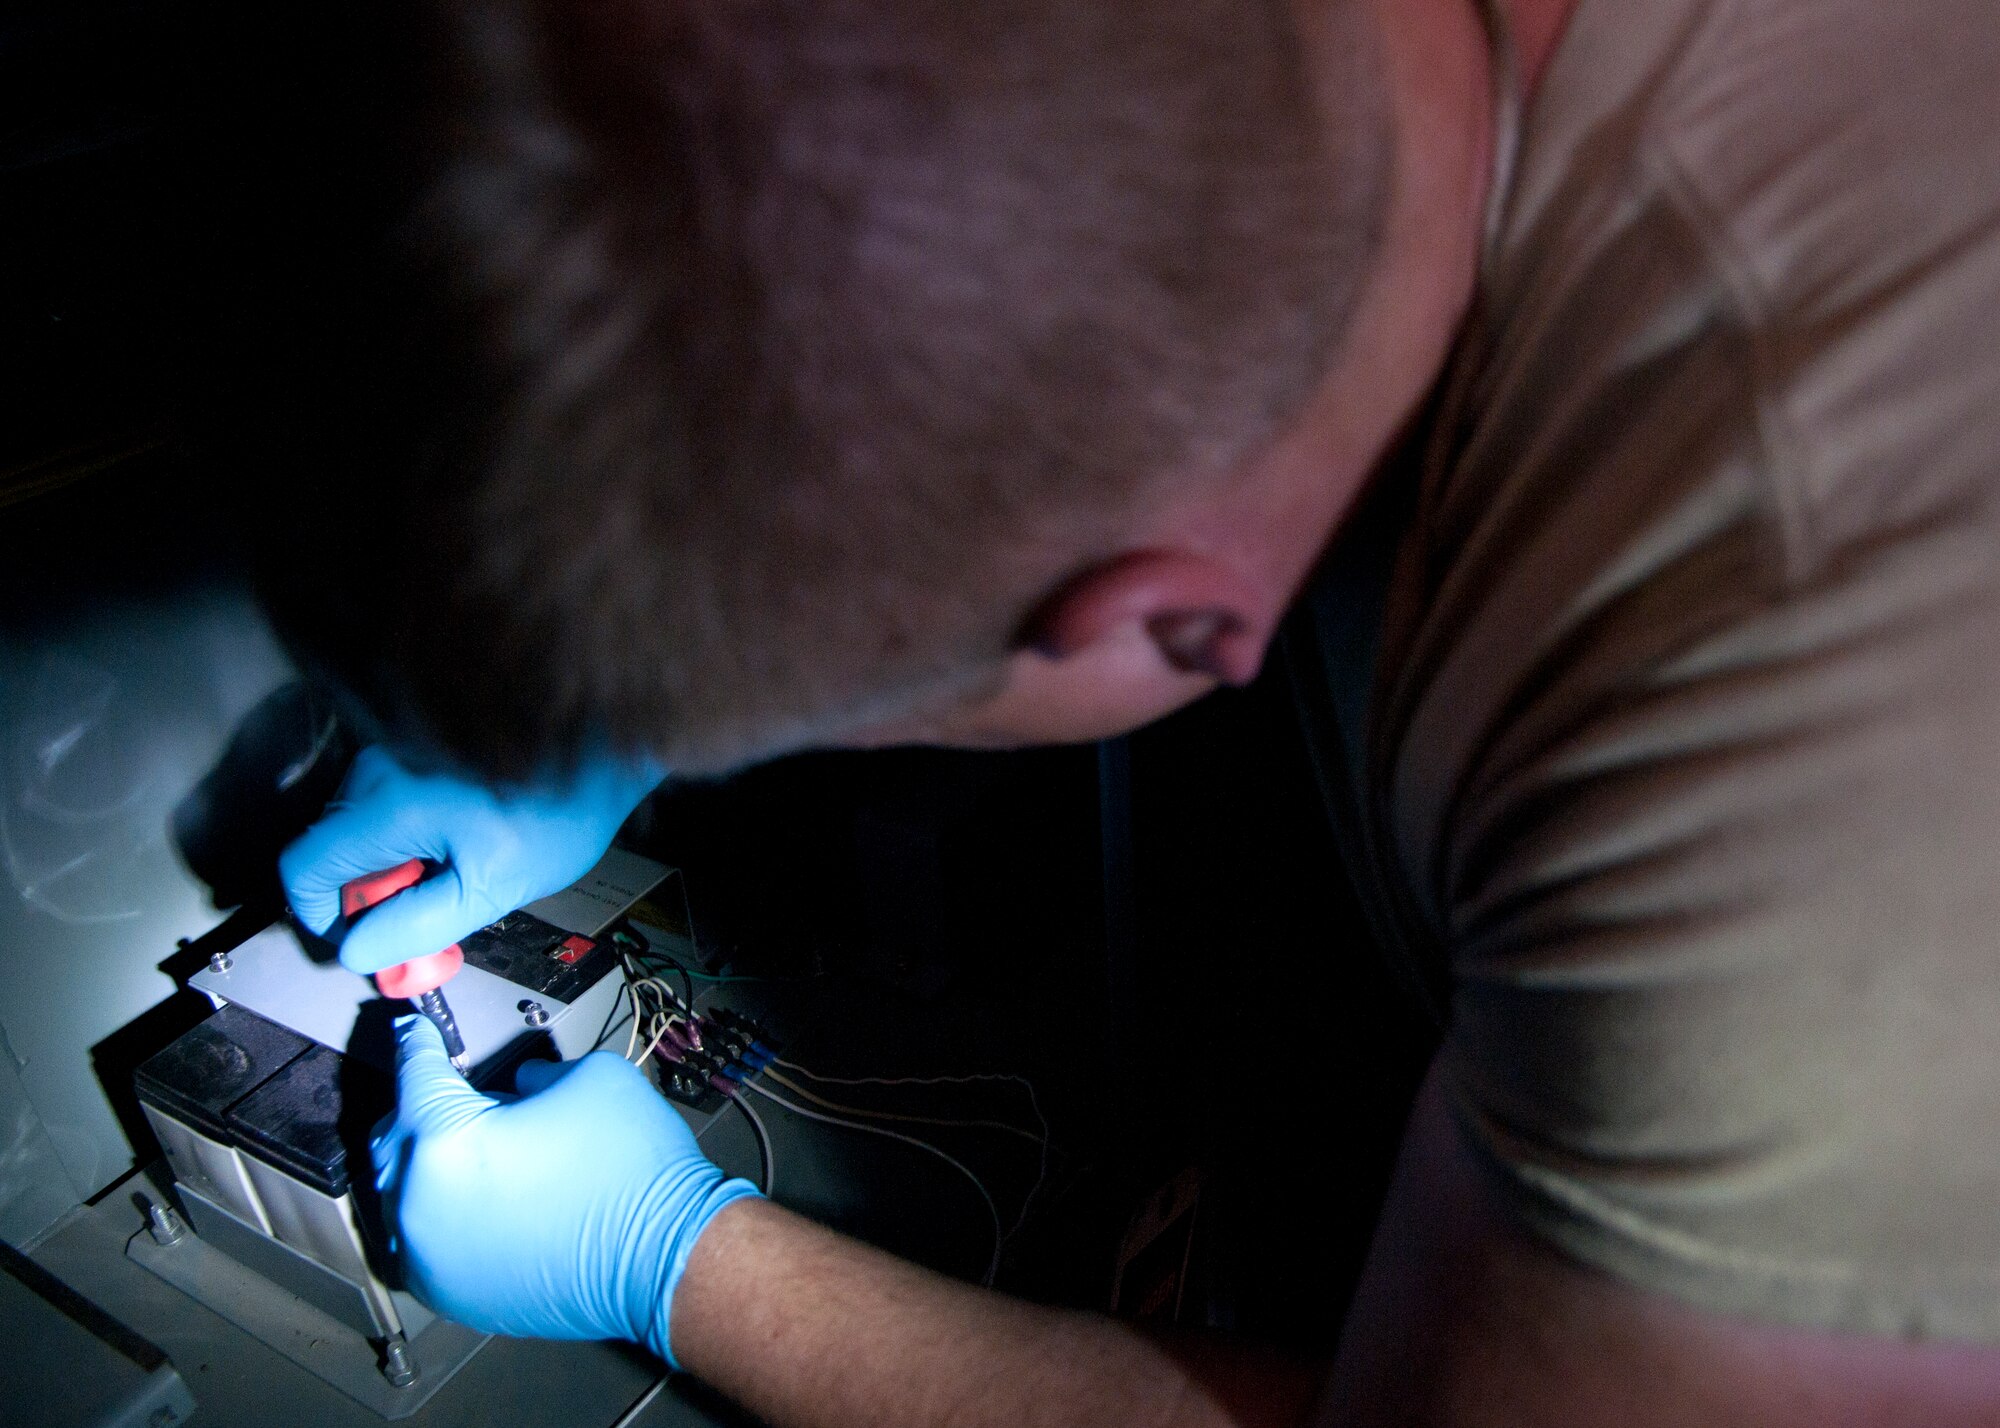 Airman 1st Class Blaine Krause, 90th Missile Maintenance Squadron Periodic Maintenance Team technician, replaces a launch support building’s power processor batter, in the F.E. Warren Air Force base, Wyo., missile complex, Sept. 2, 2015. The power processor allows the site to transition from commercial power to the back-up generator during commercial power blackouts. (U.S. Air Force photo by Airman 1st Class Malcolm Mayfield)